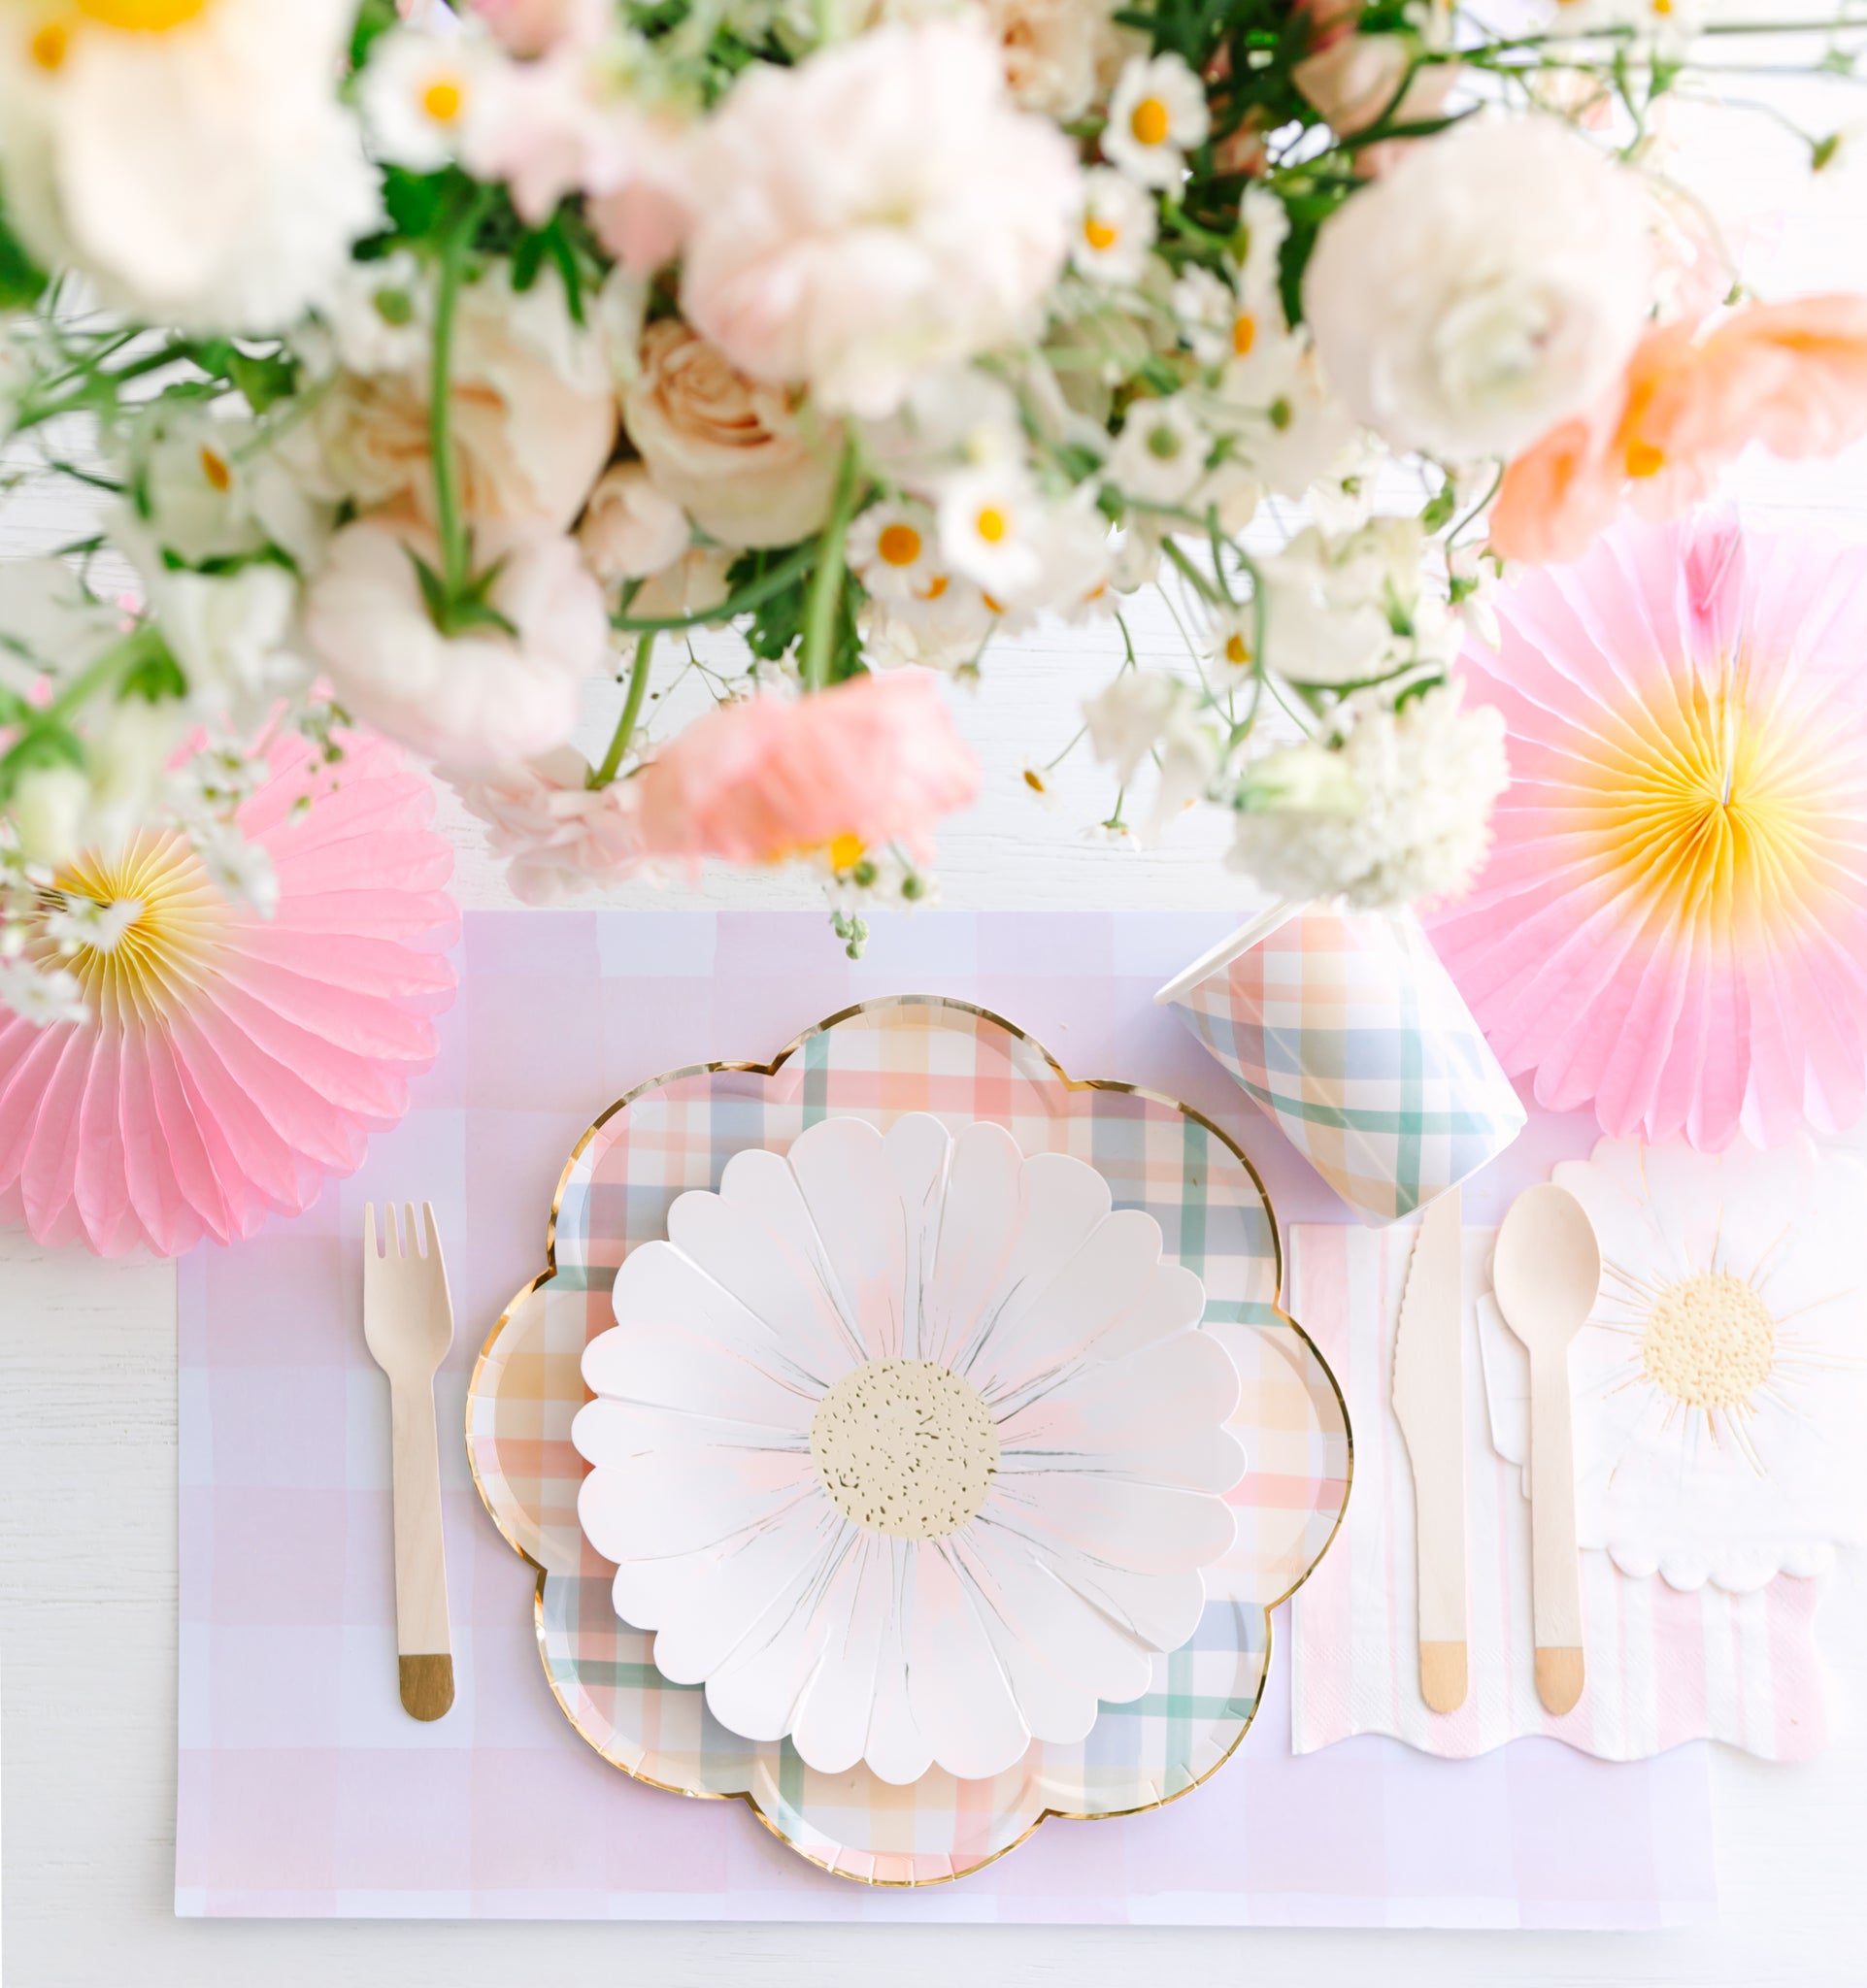 Daisy party plates displayed with other Daisy theme party supplies.